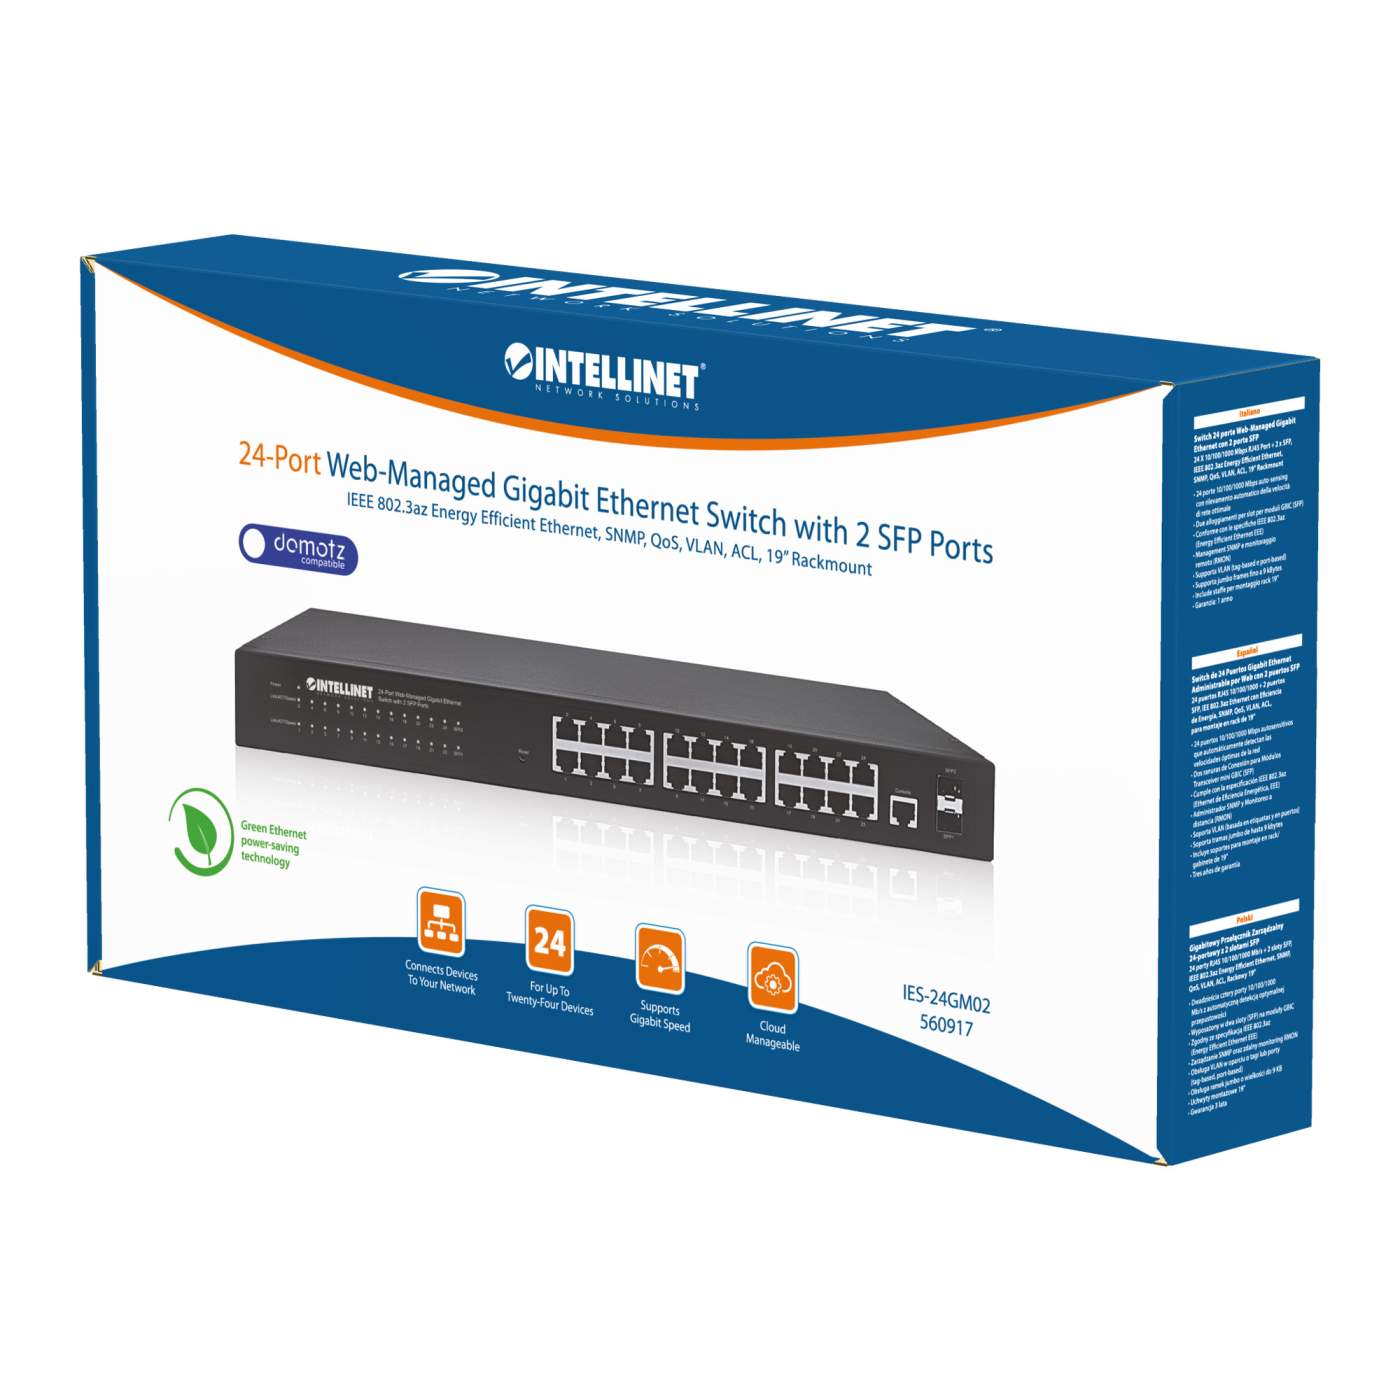 24-Port Web-Managed Gigabit Ethernet Switch with 2 SFP Ports Packaging Image 2